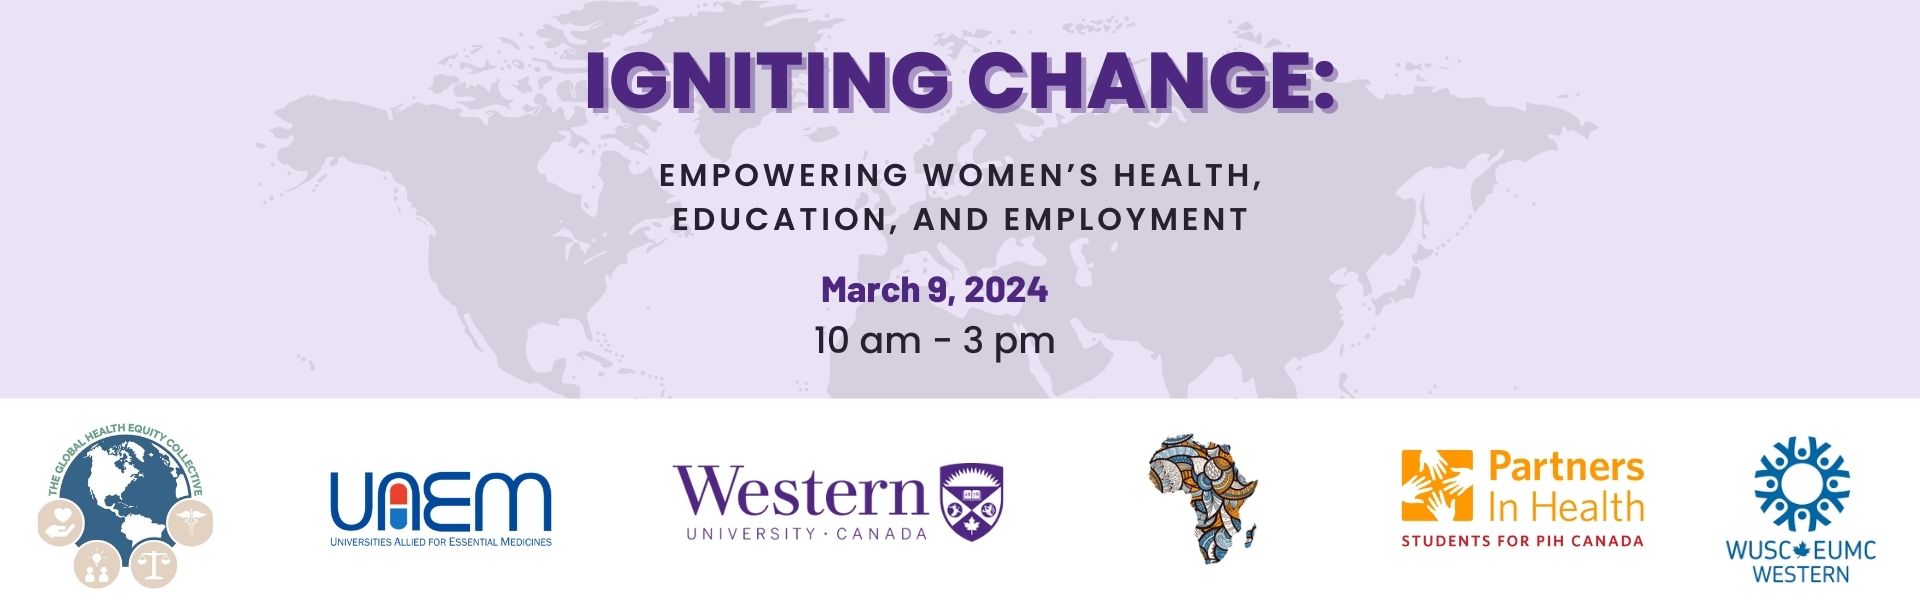 Text that says: Igniting Change: Empowering Women’s Health, Education, and Employment. March 9 from 10 am to 3 pm